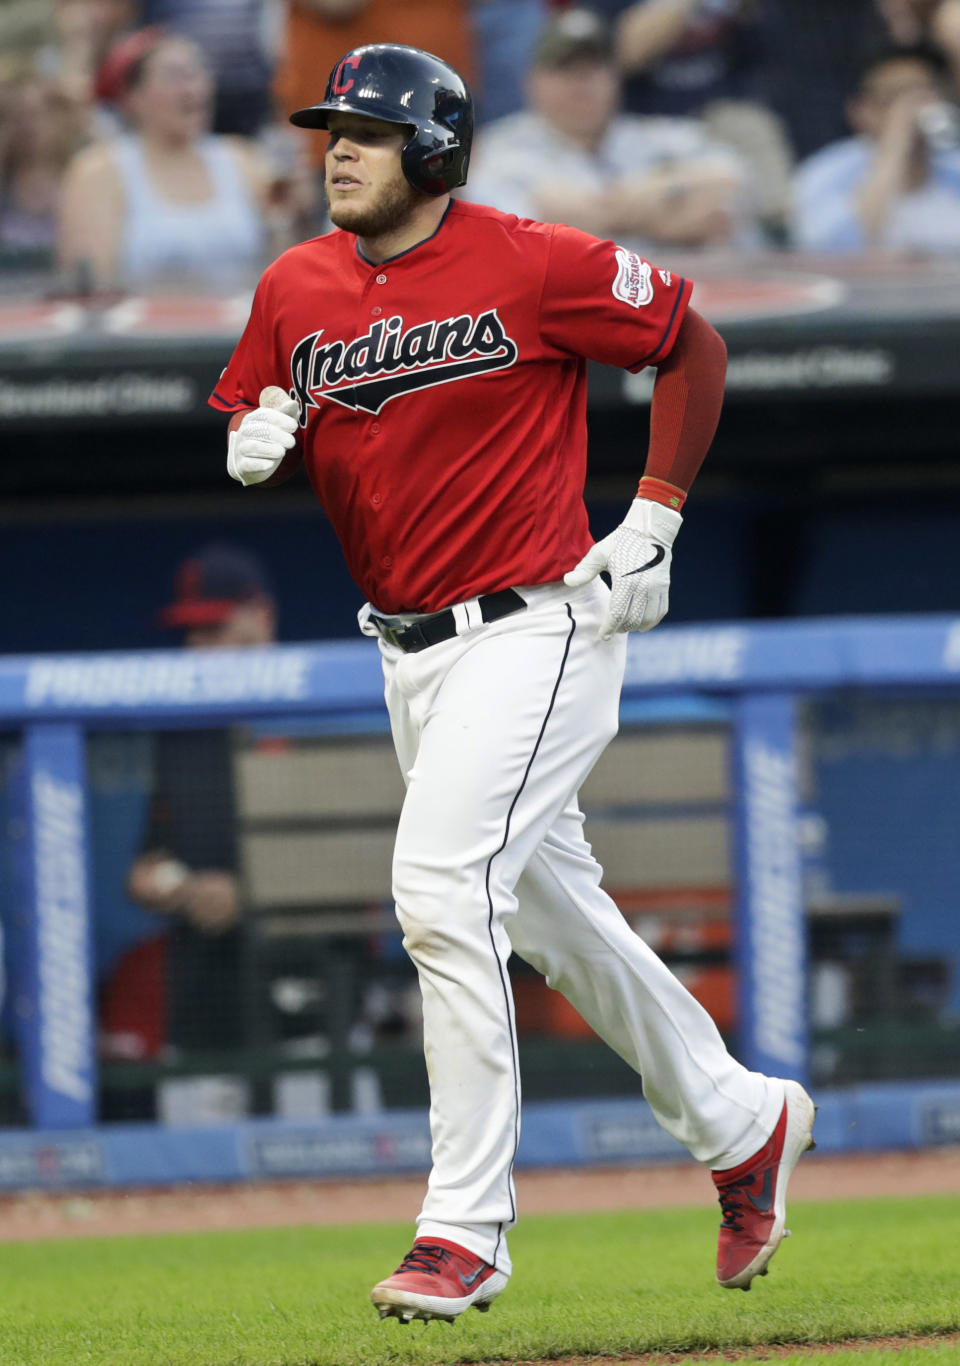 Cleveland Indians' Roberto Perez runs the bases after hitting a solo home run in the fifth inning in a baseball game against the Kansas City Royals, Tuesday, June 25, 2019, in Cleveland. (AP Photo/Tony Dejak)